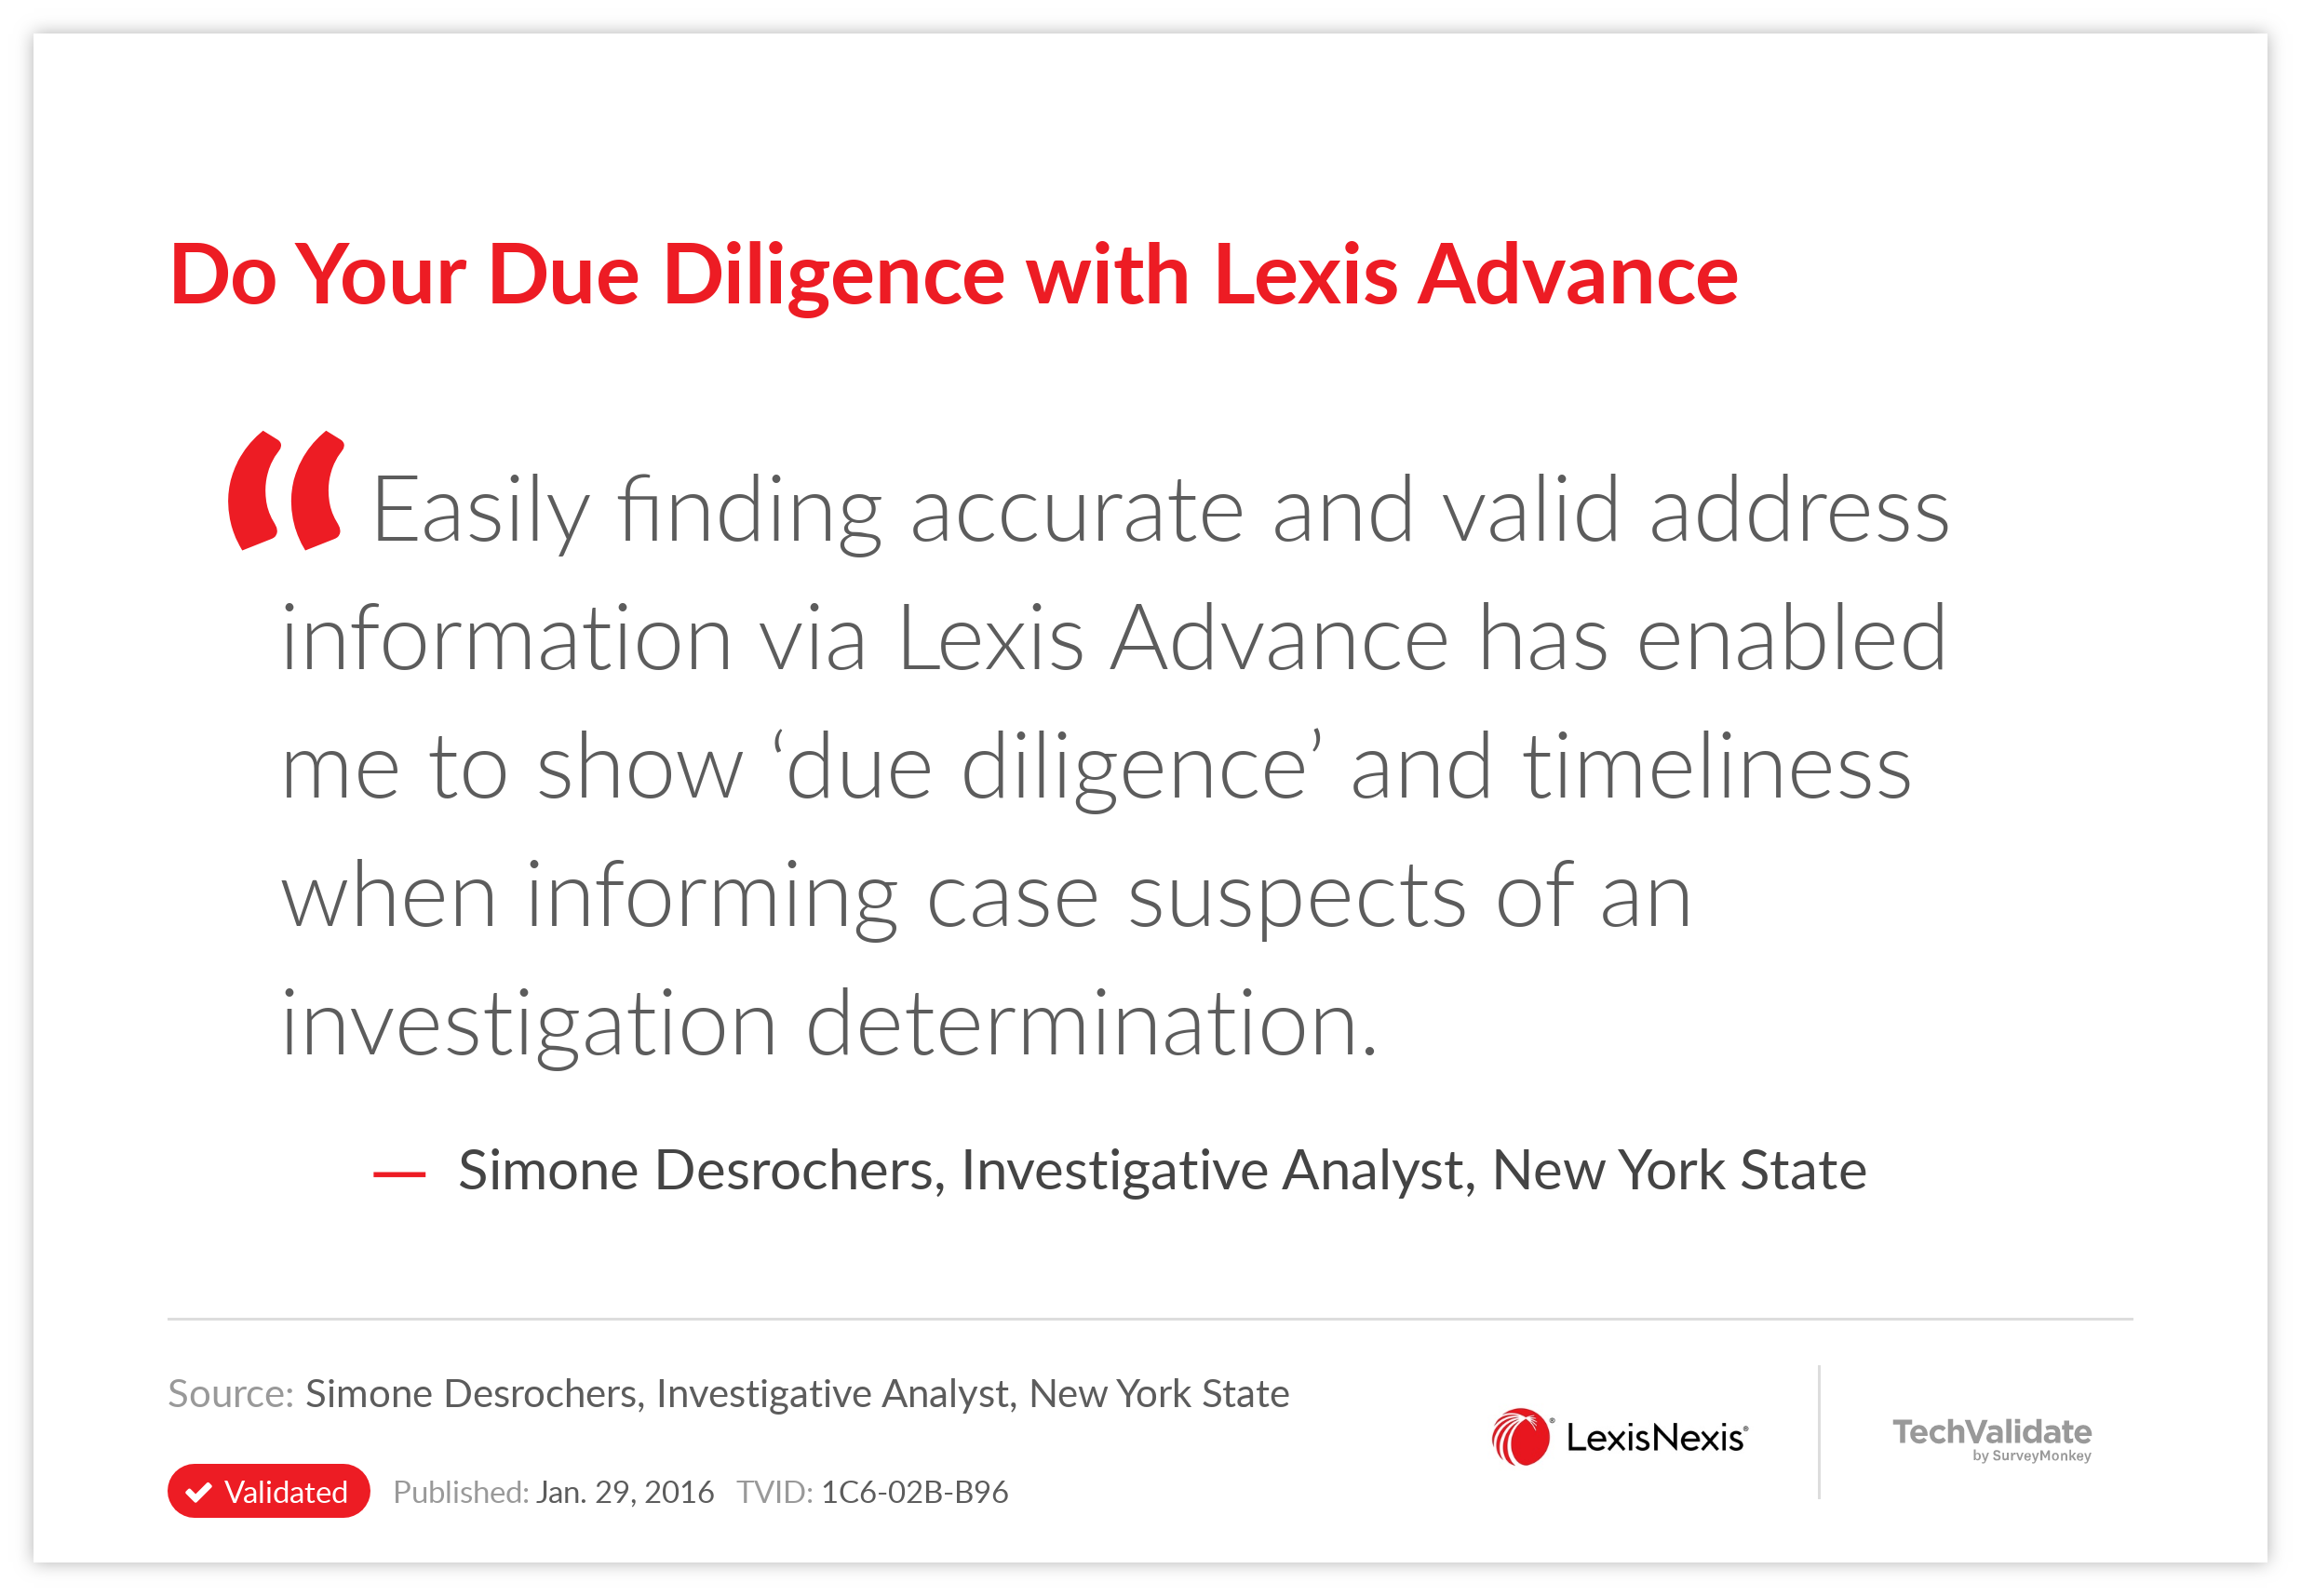 Do Your Due Diligence with Lexis Advance